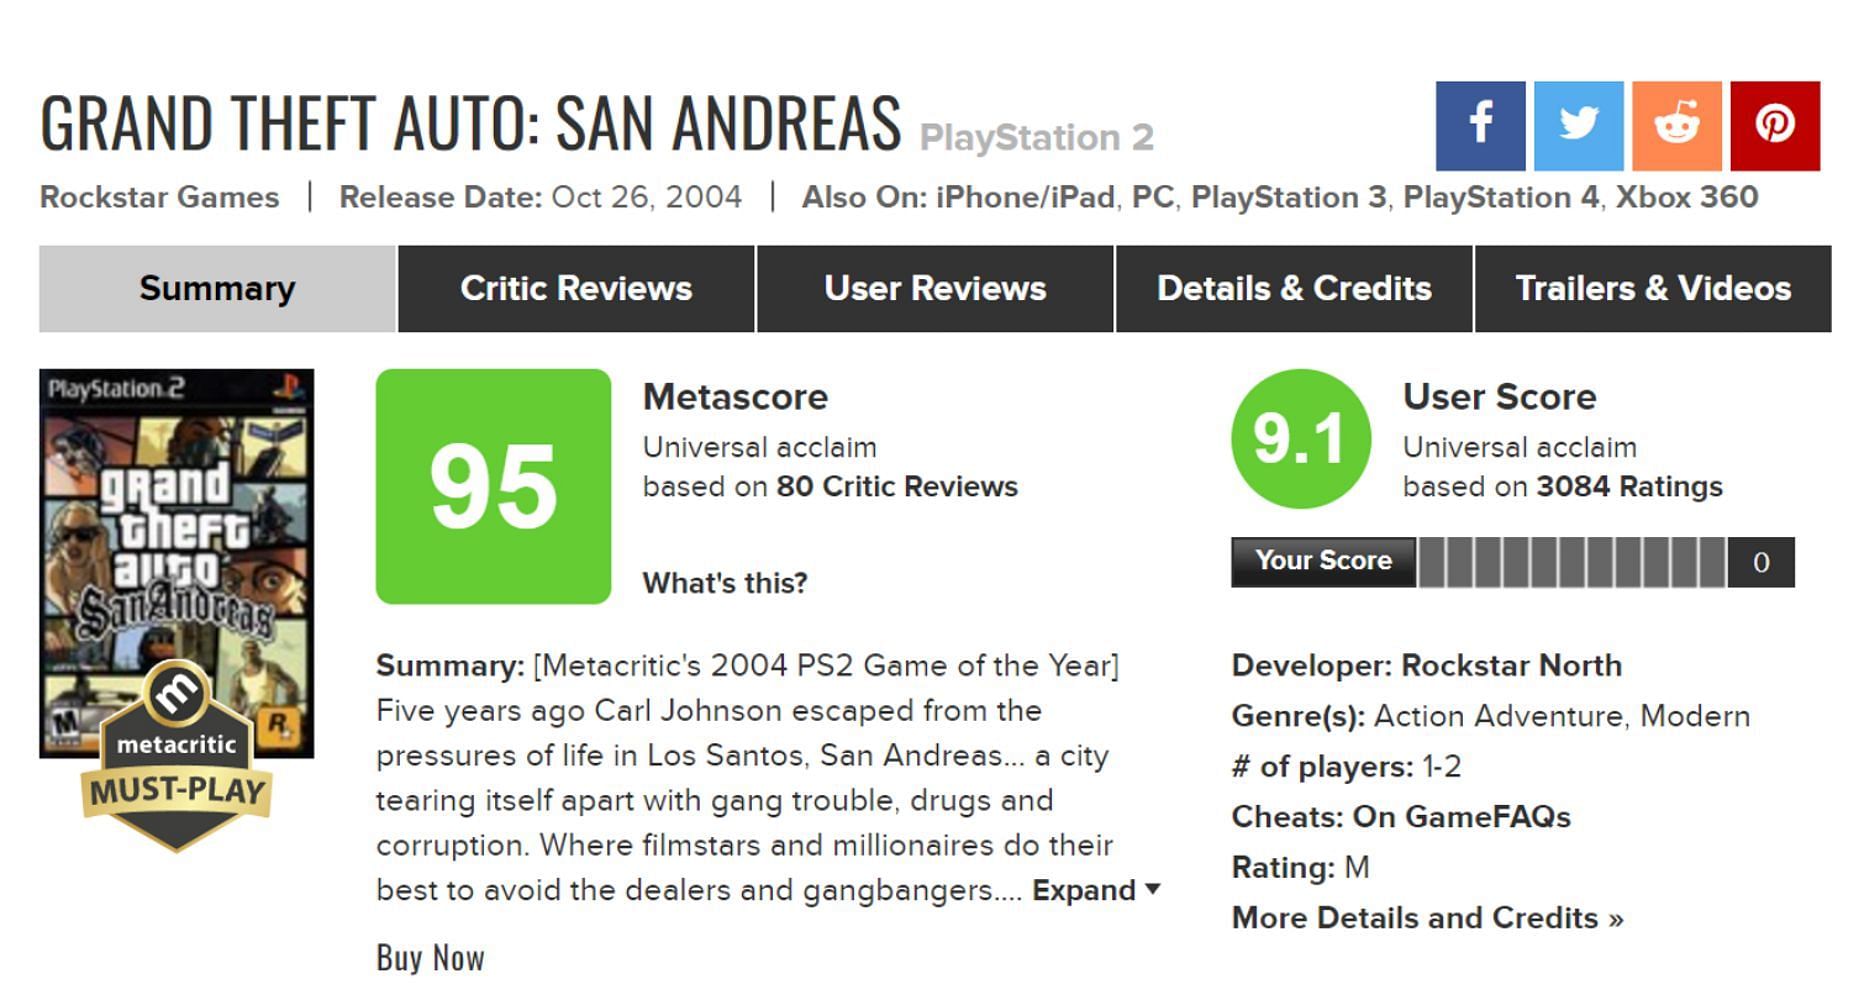 GTA San Andreas was highly rated at the time (Image via Metacritic)